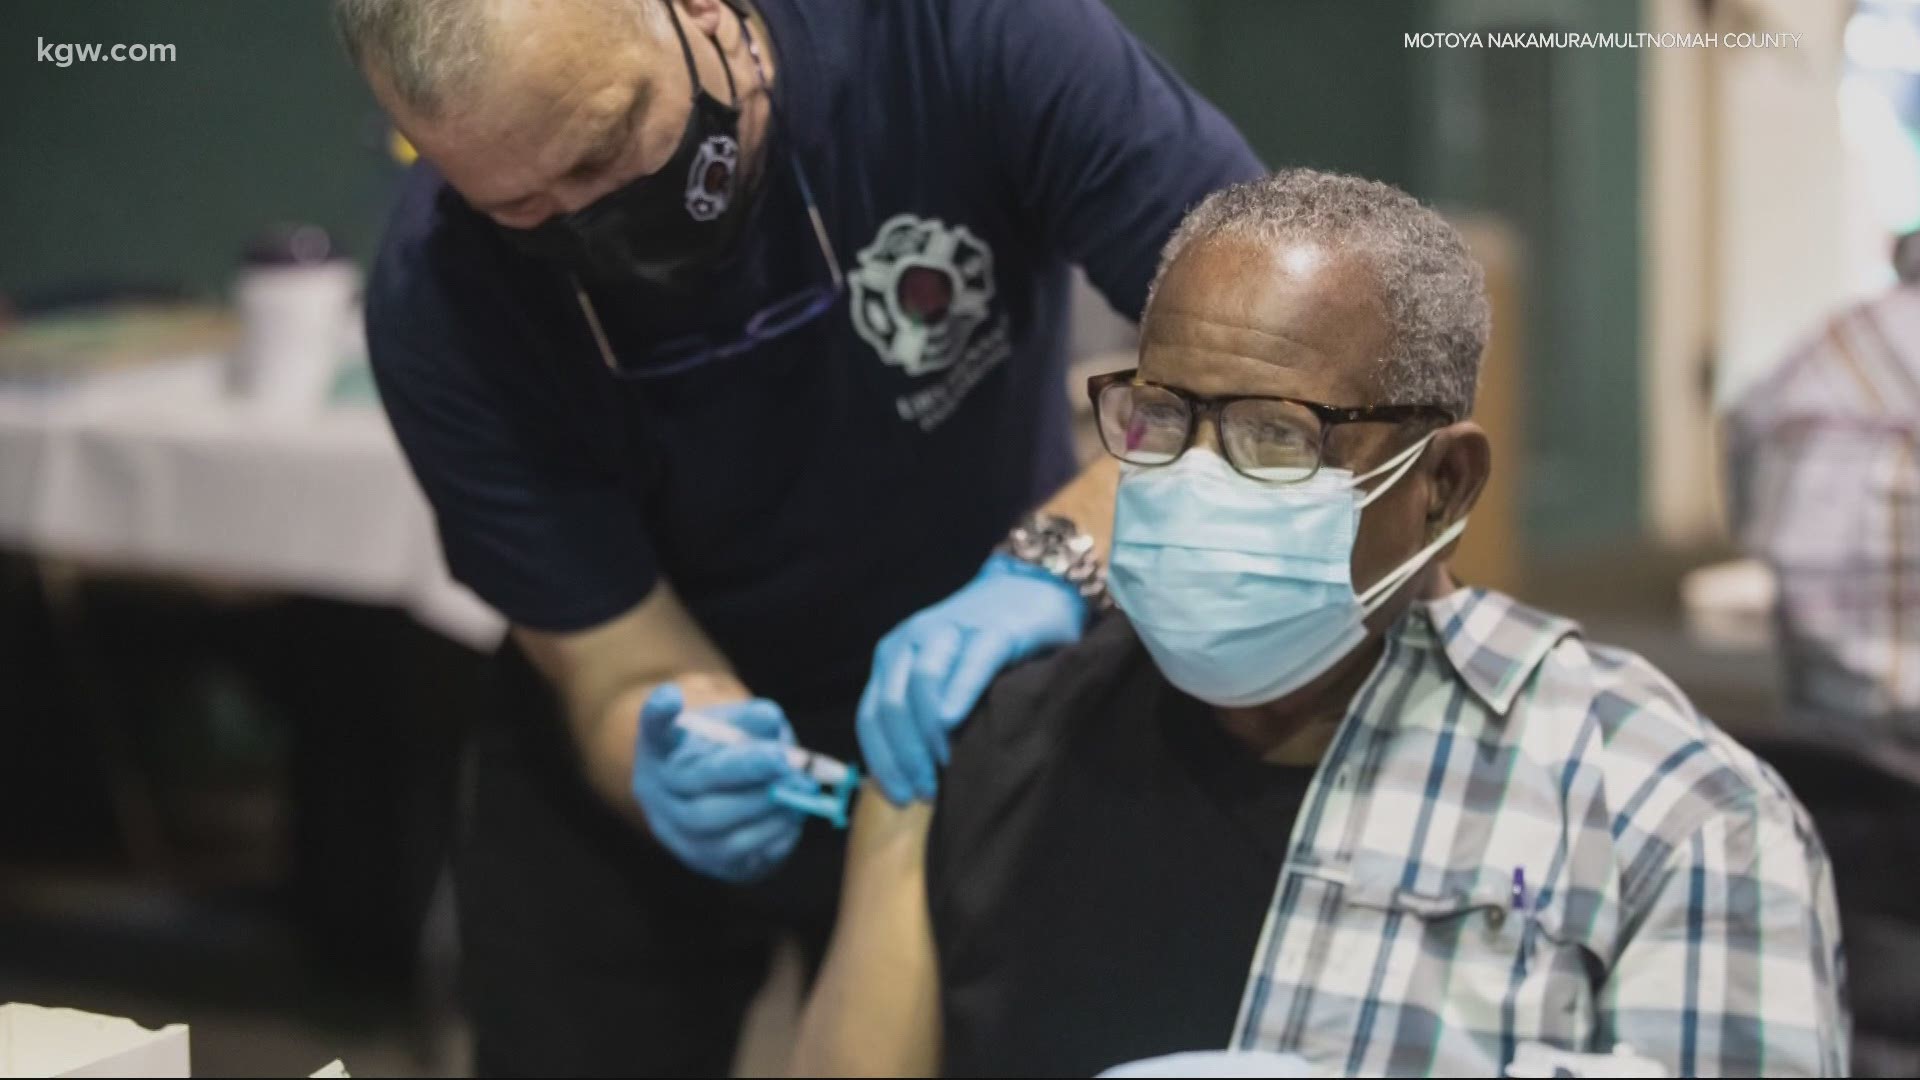 Nearly 400 people in the BIPOC community who qualified for the vaccine were treated at a special clinic last Friday.